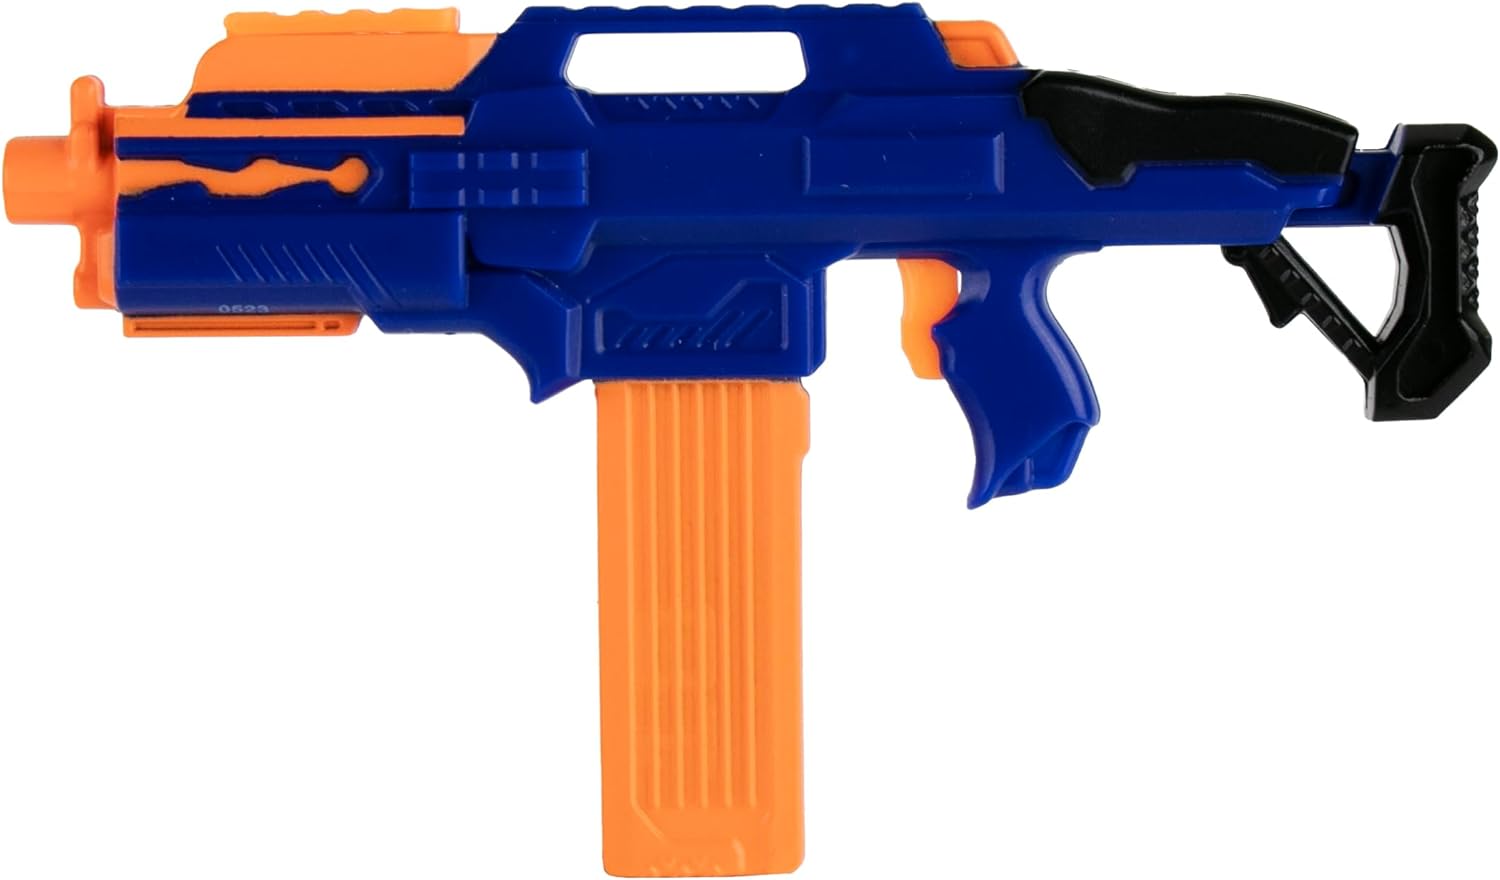 World' Smallest Nerf Elite 2.0 Blasters. Three Distinct Styles to Collect  Styles Selected at Random.